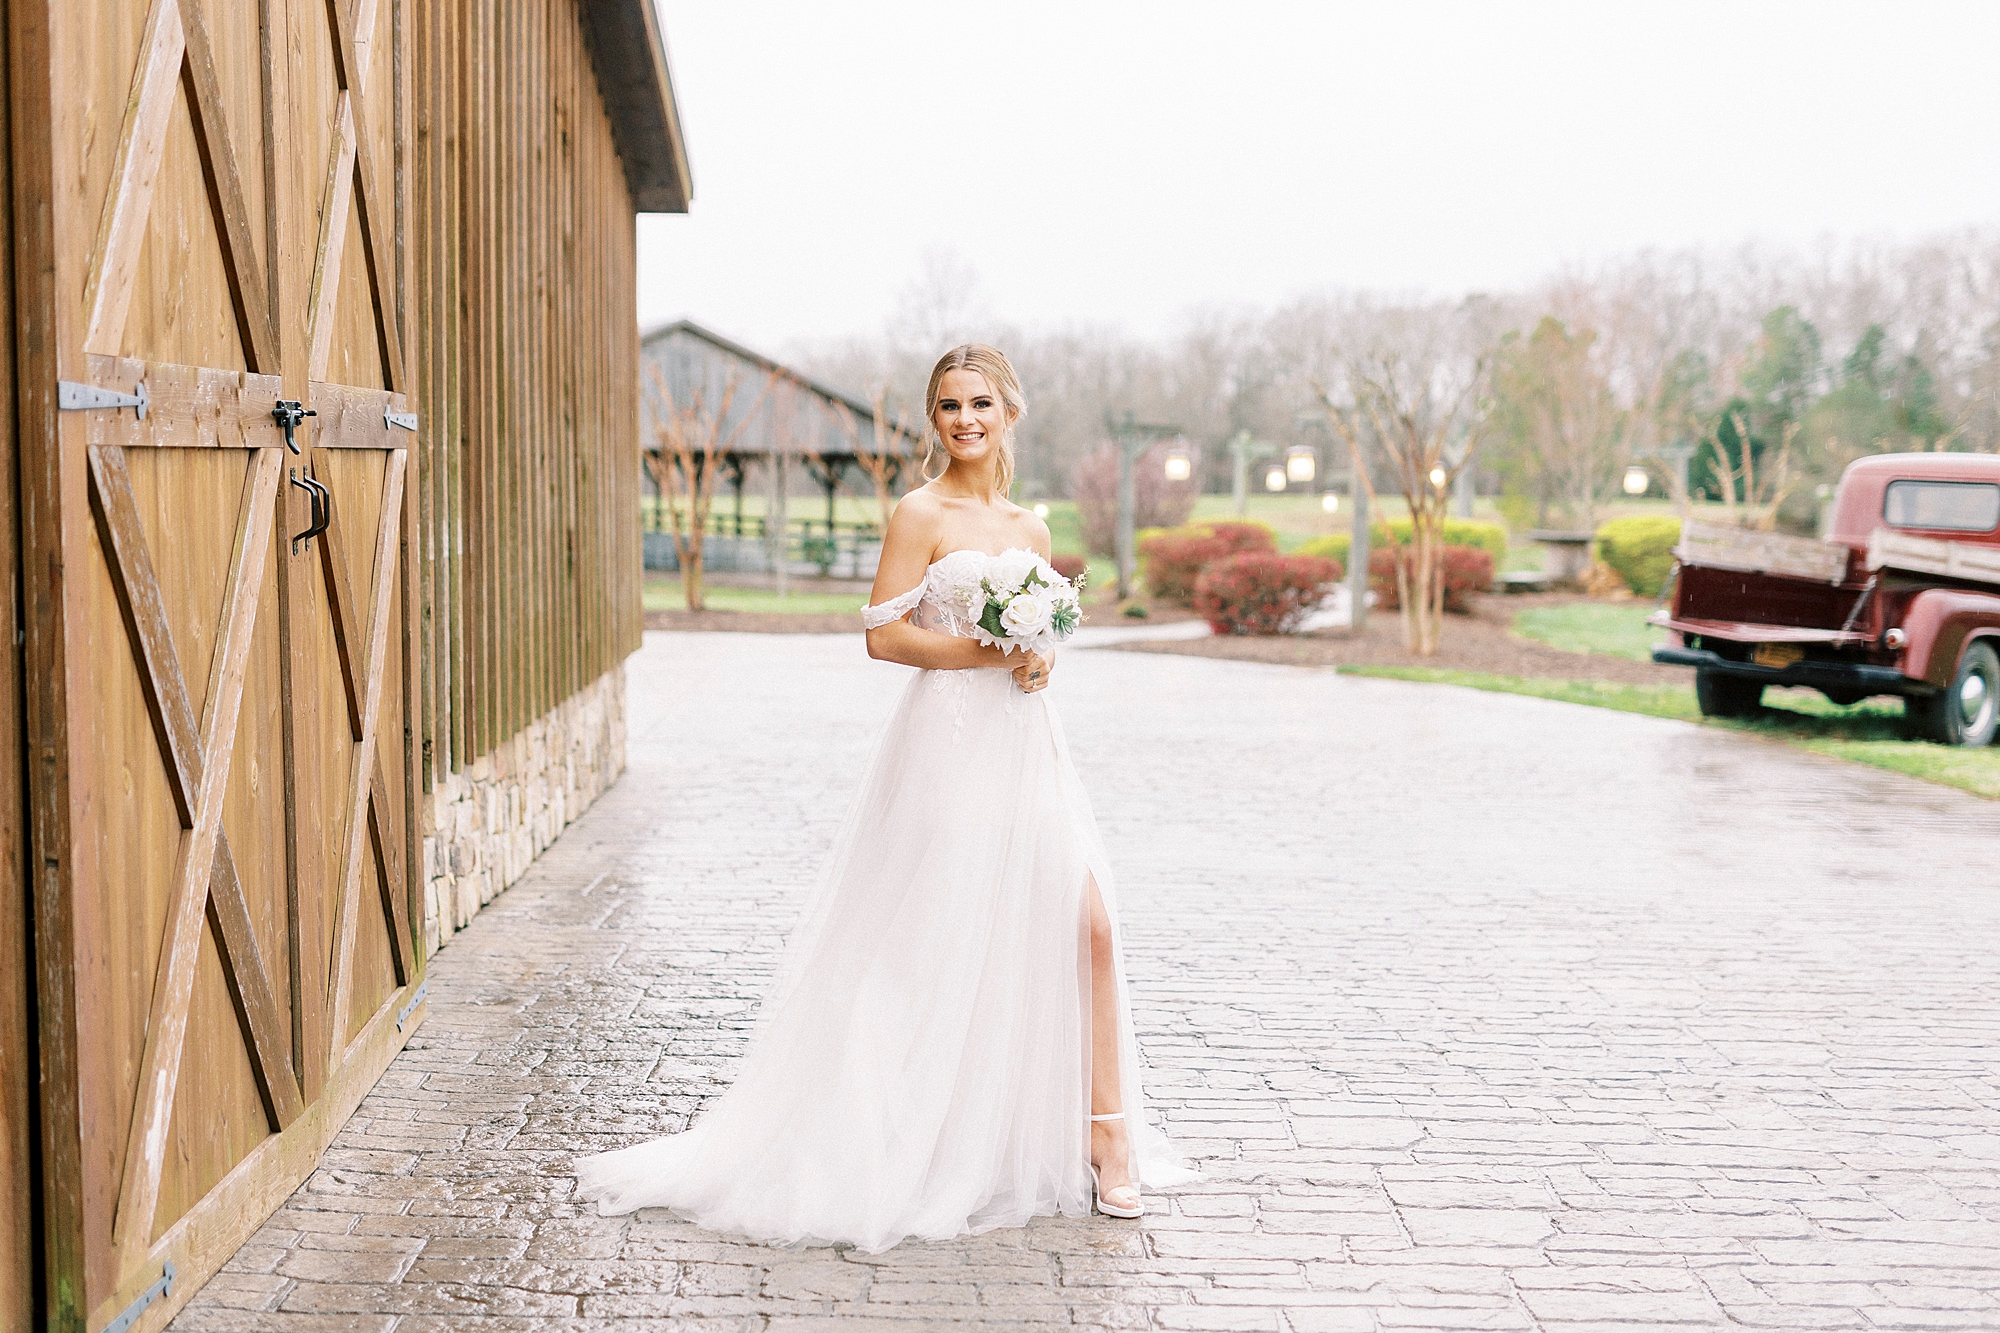 bride poses with leg poking out of dress slit by barn at The Farmstead